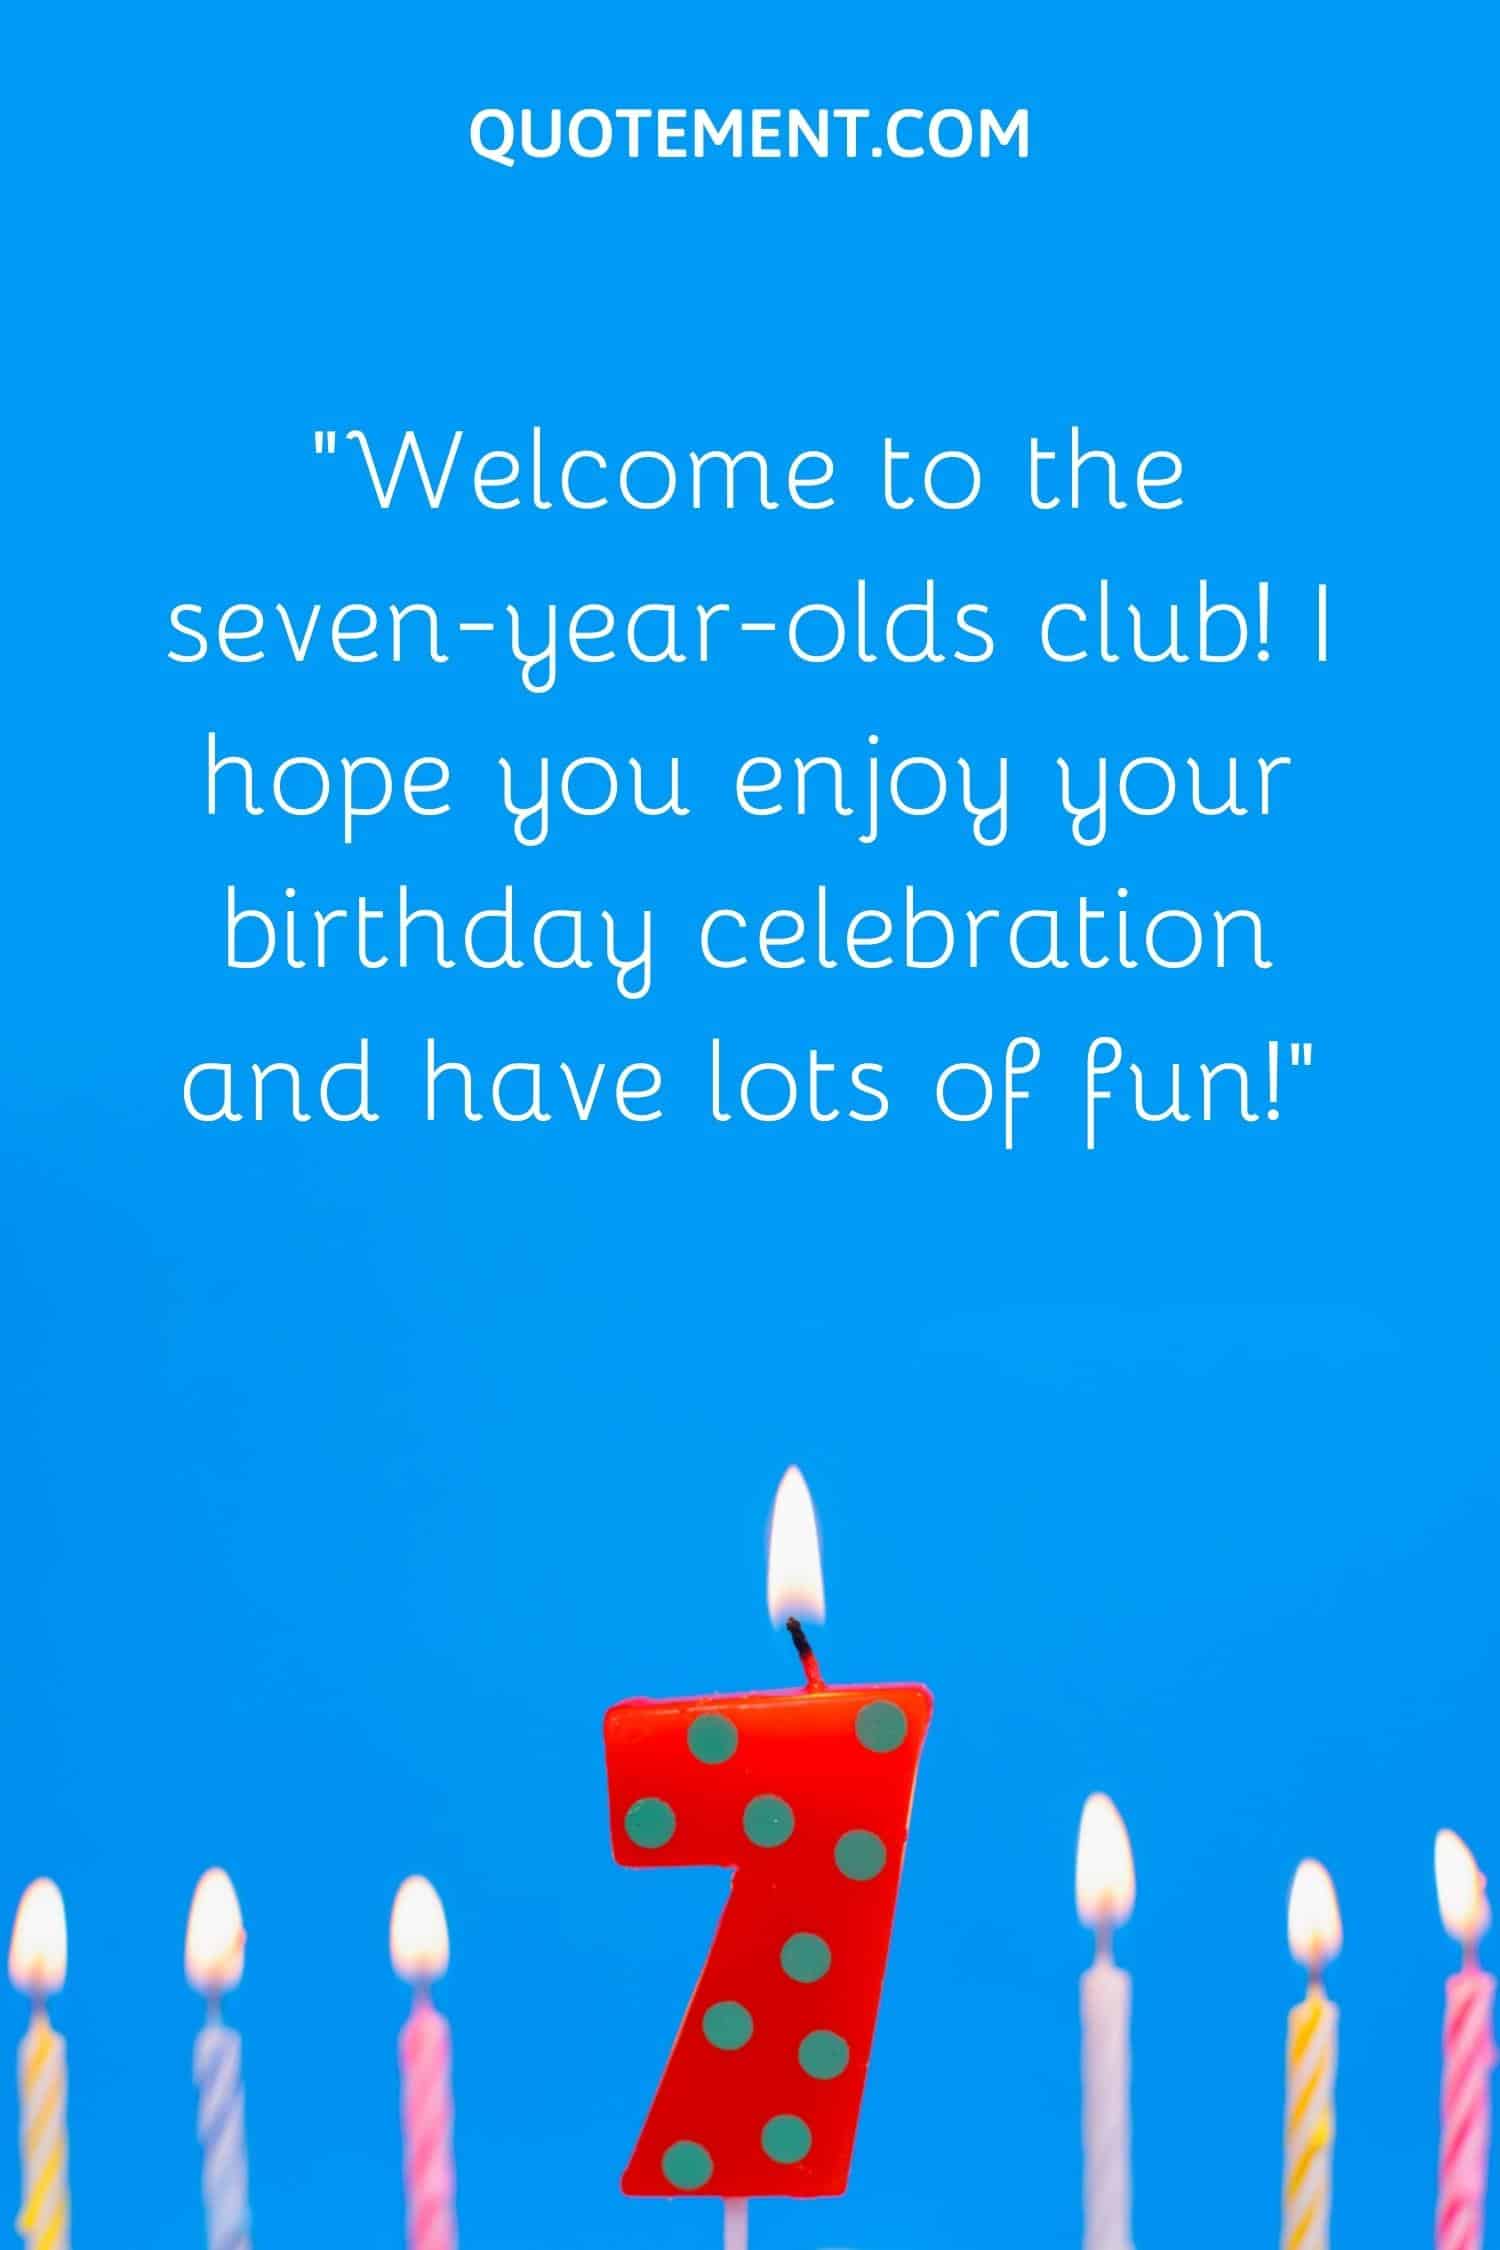 “Welcome to the seven-year-olds club! I hope you enjoy your birthday celebration and have lots of fun!”